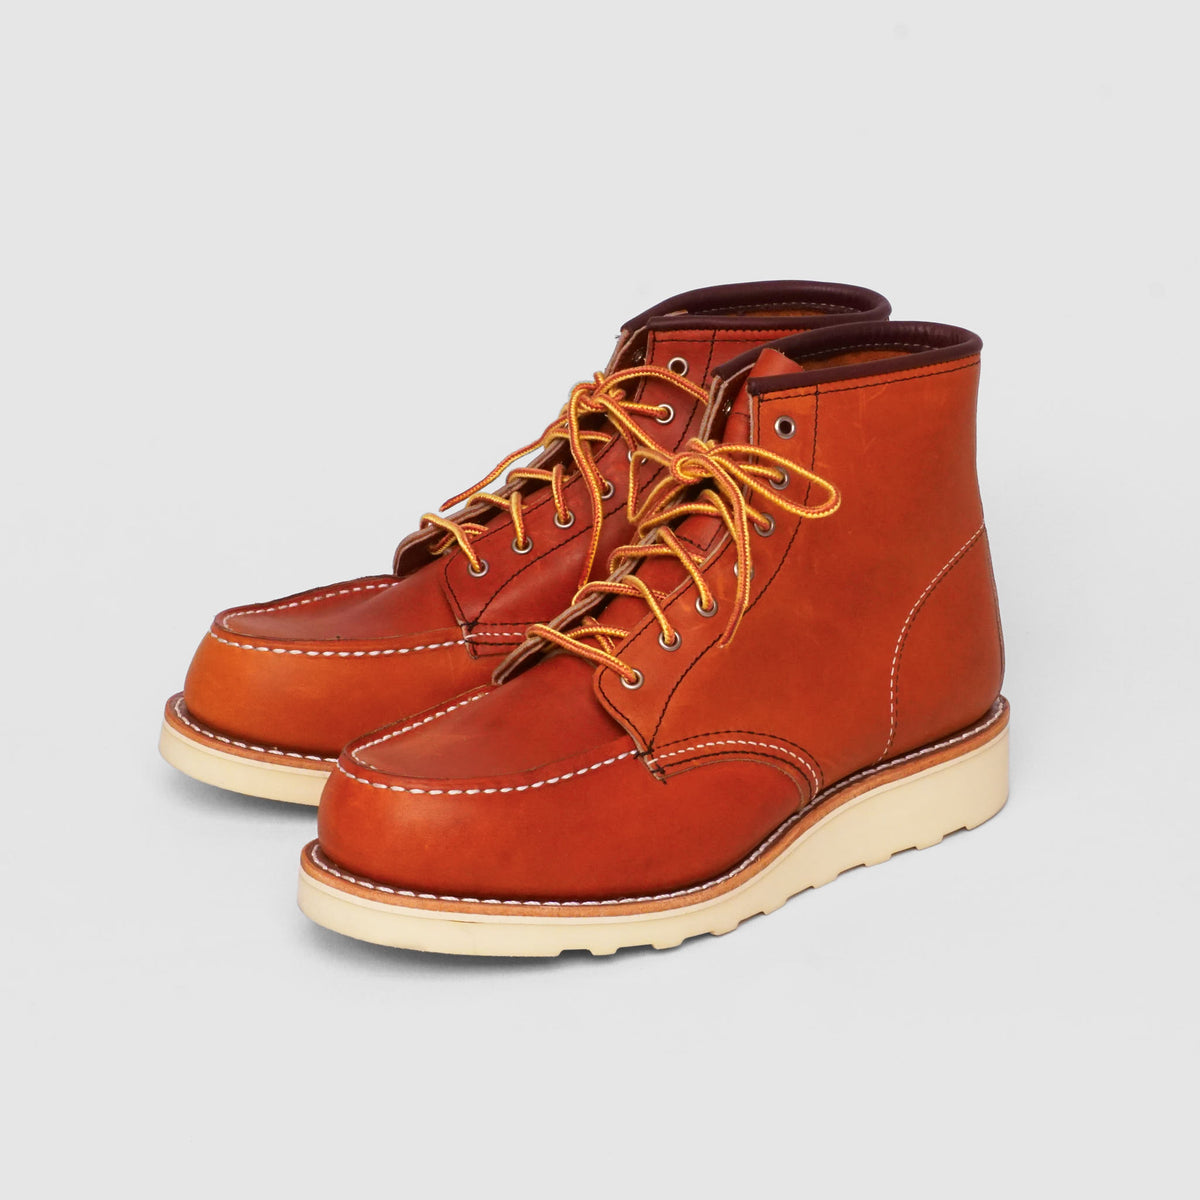 Red Wing Heritage Shoes Ladies Classic Moc-Toe, 3375, 3373, 3428